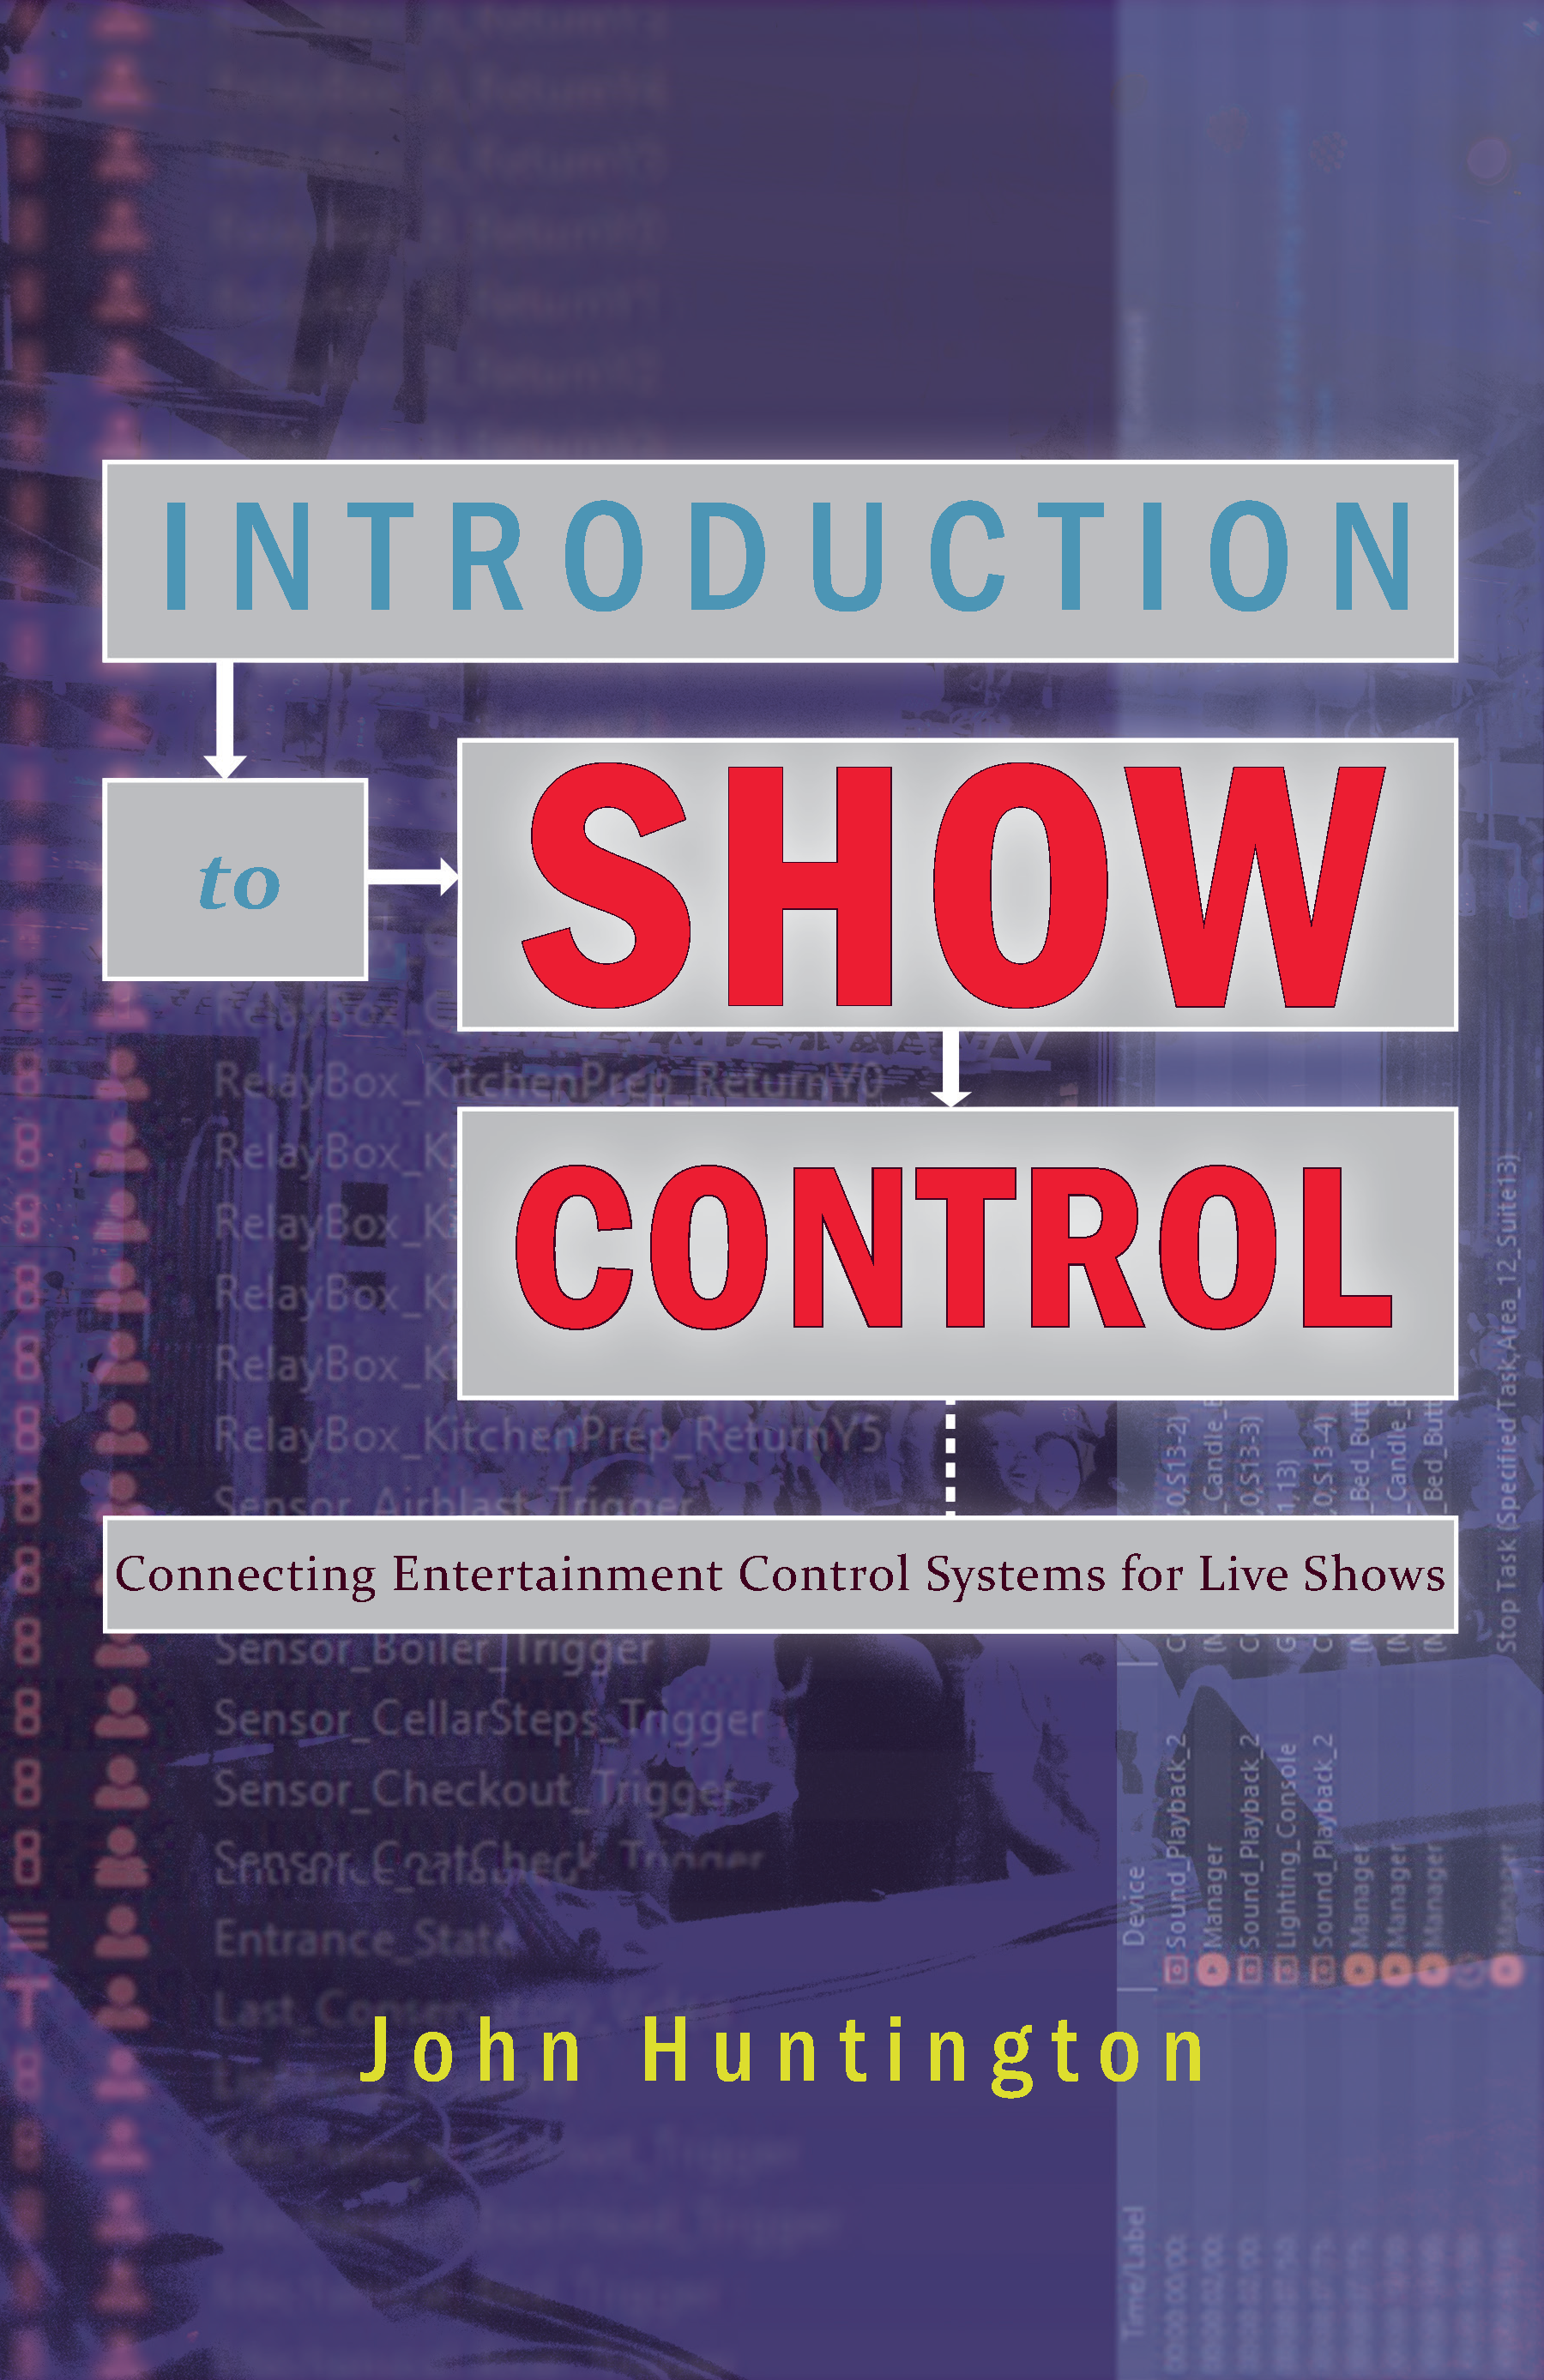 IntroToShowControlCover-Front-2023-04-05.png